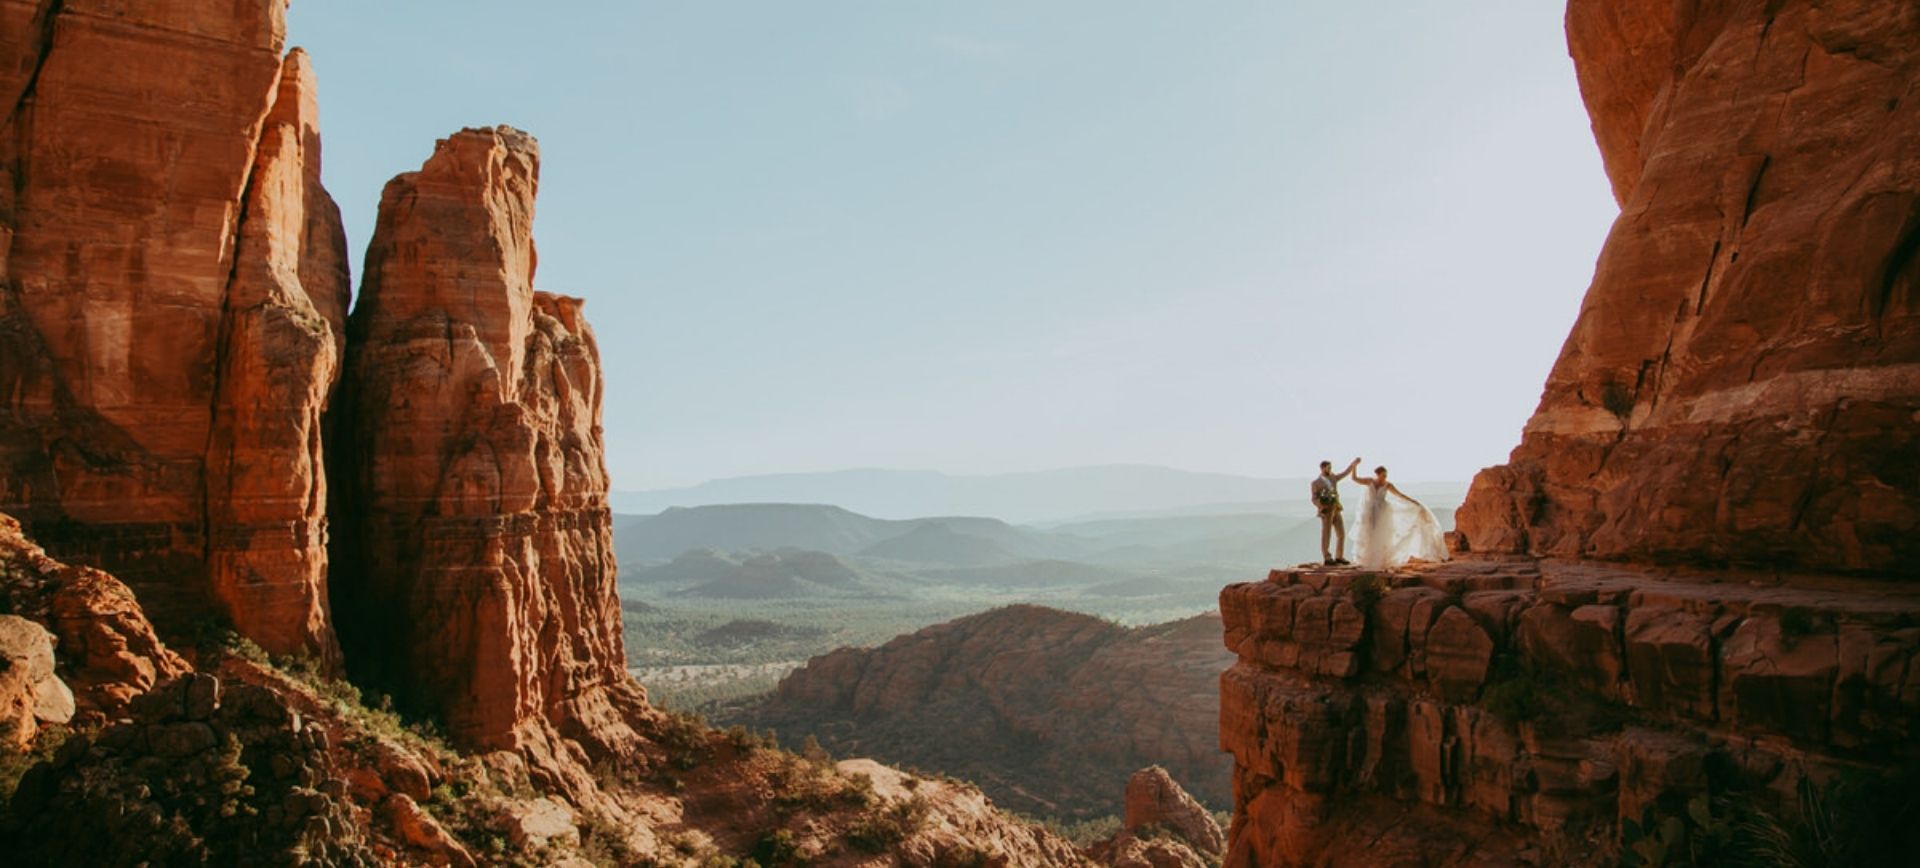 cathedral rock wedding - sedona elopement package